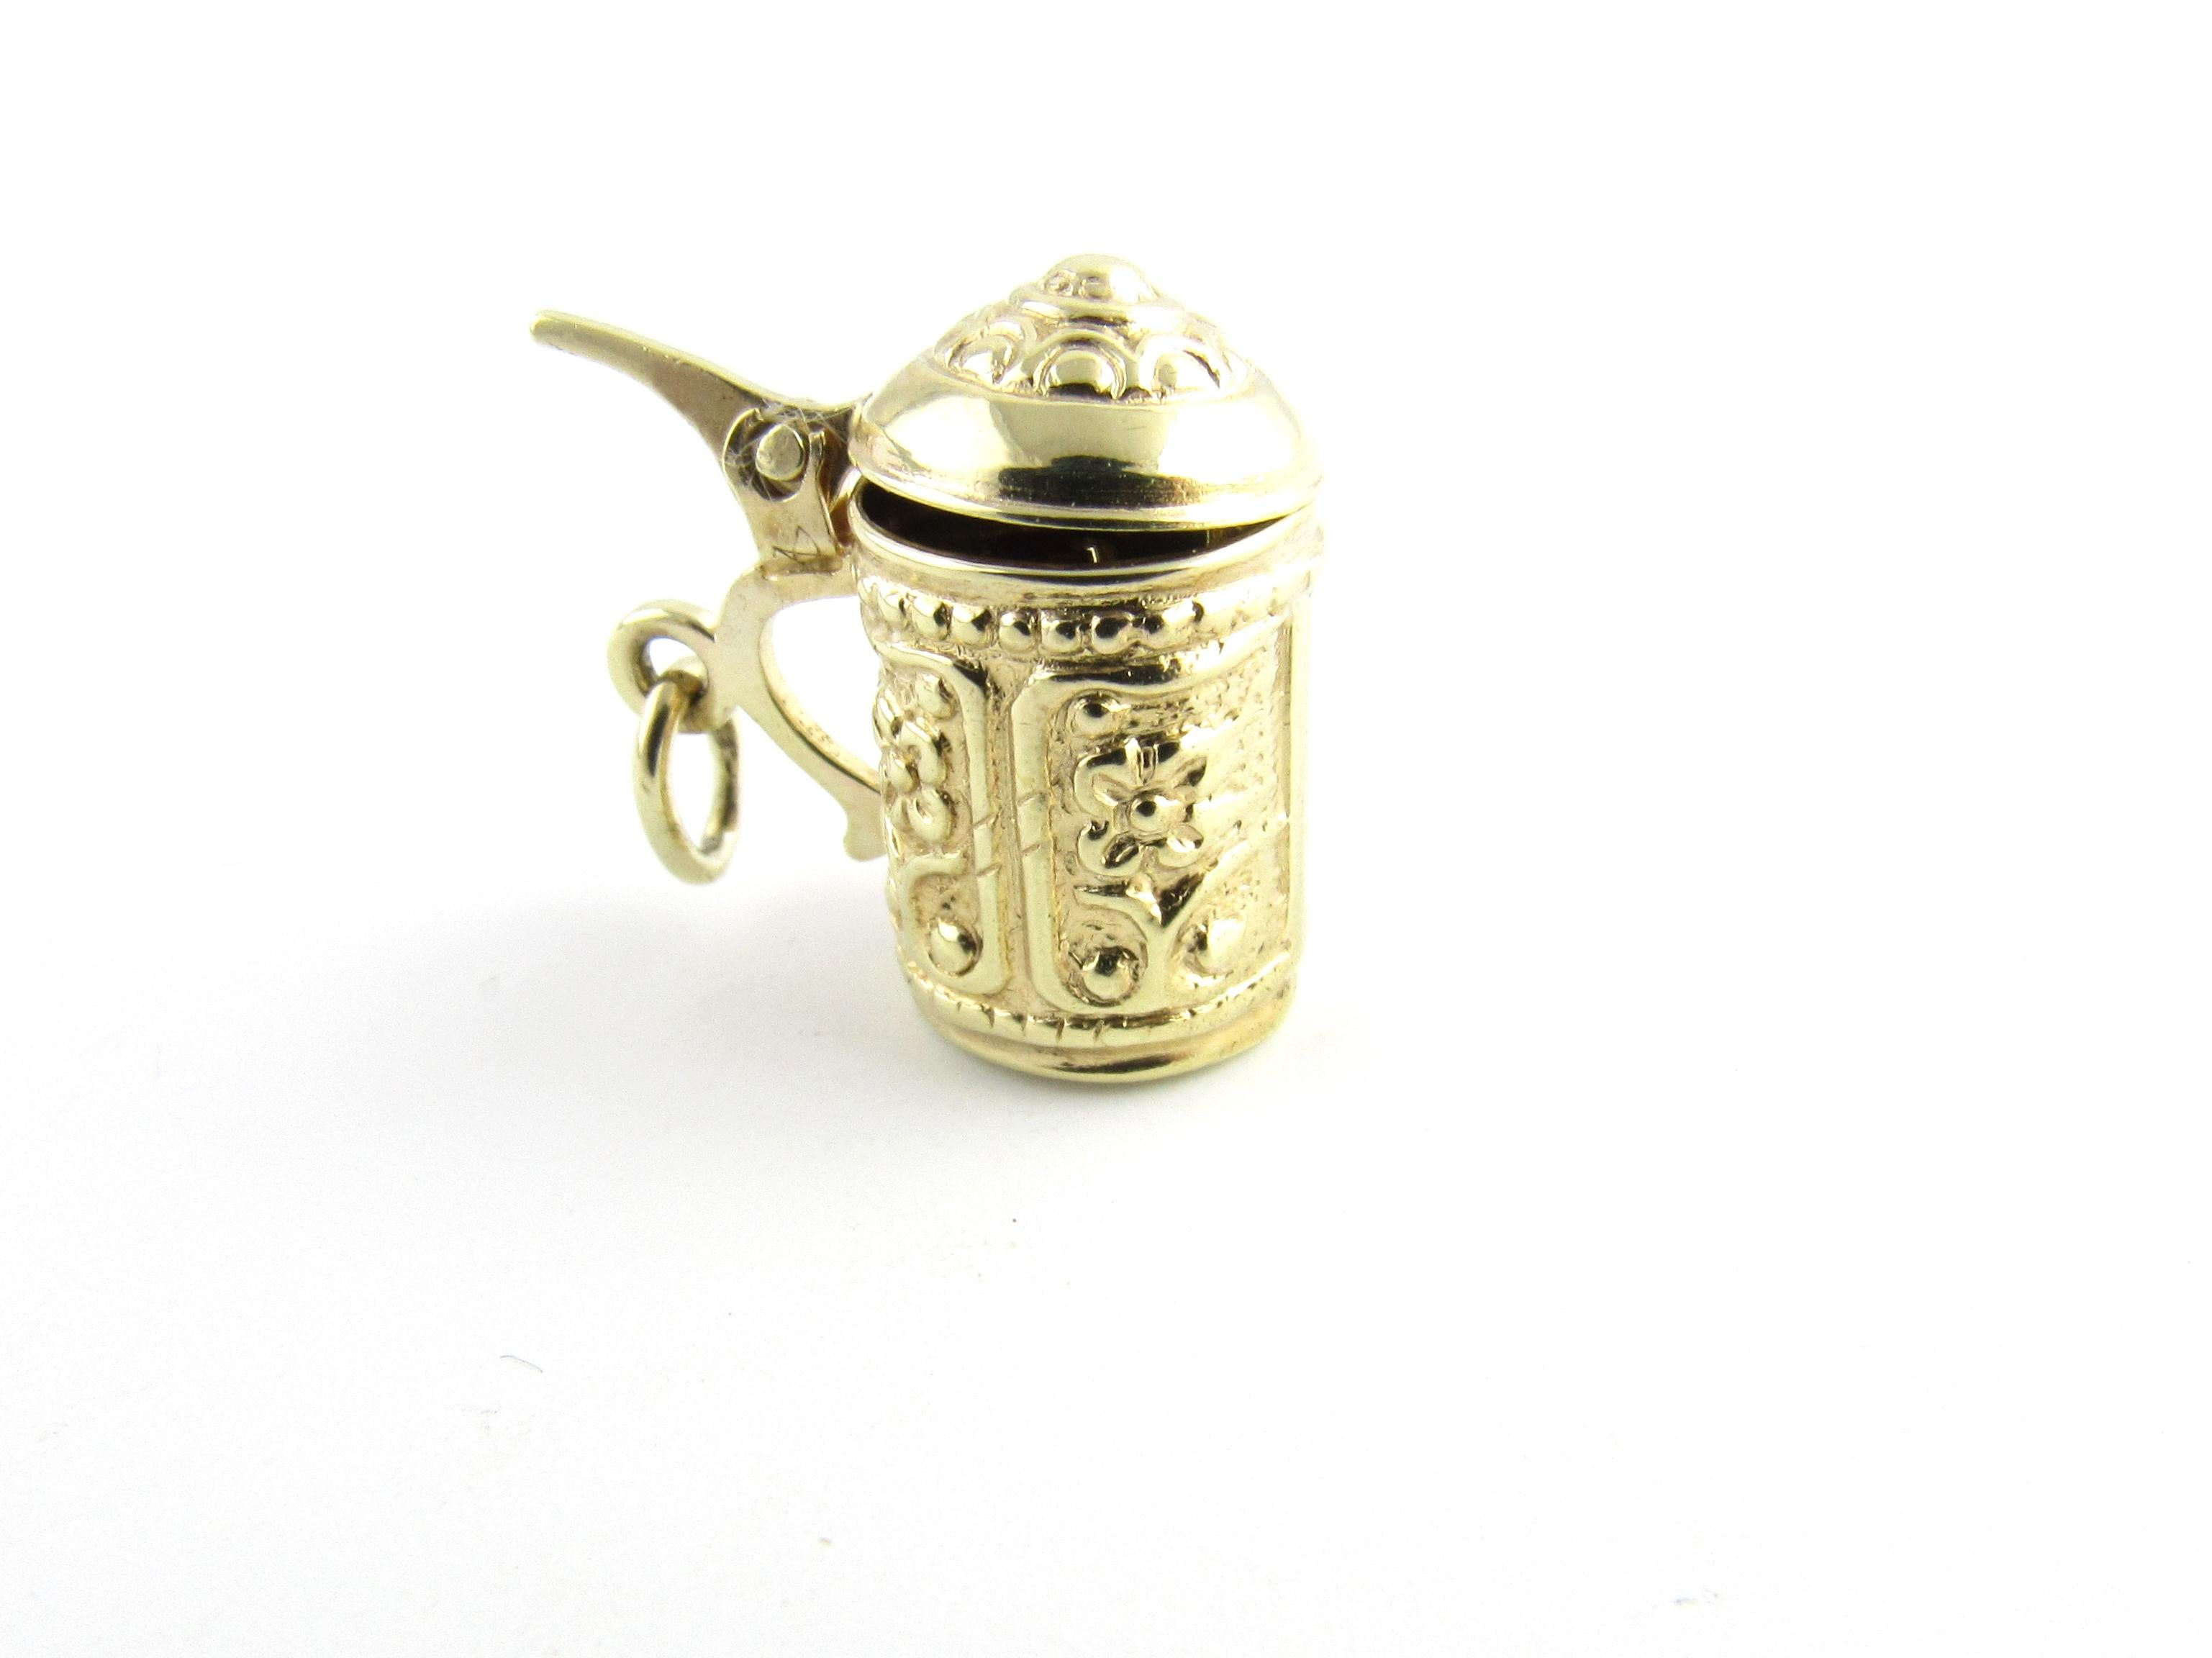 Vintage 8 Karat Yellow Gold Beer Stein Charm

Cheers!

This lovely 3D charm with hinged lid is crafted in beautifully detailed 8K yellow gold.

Size: 18 mm x 17 mm

Weight: 1.4 dwt. / 2.2 gr.

Stamped: 333

Very good condition, professionally